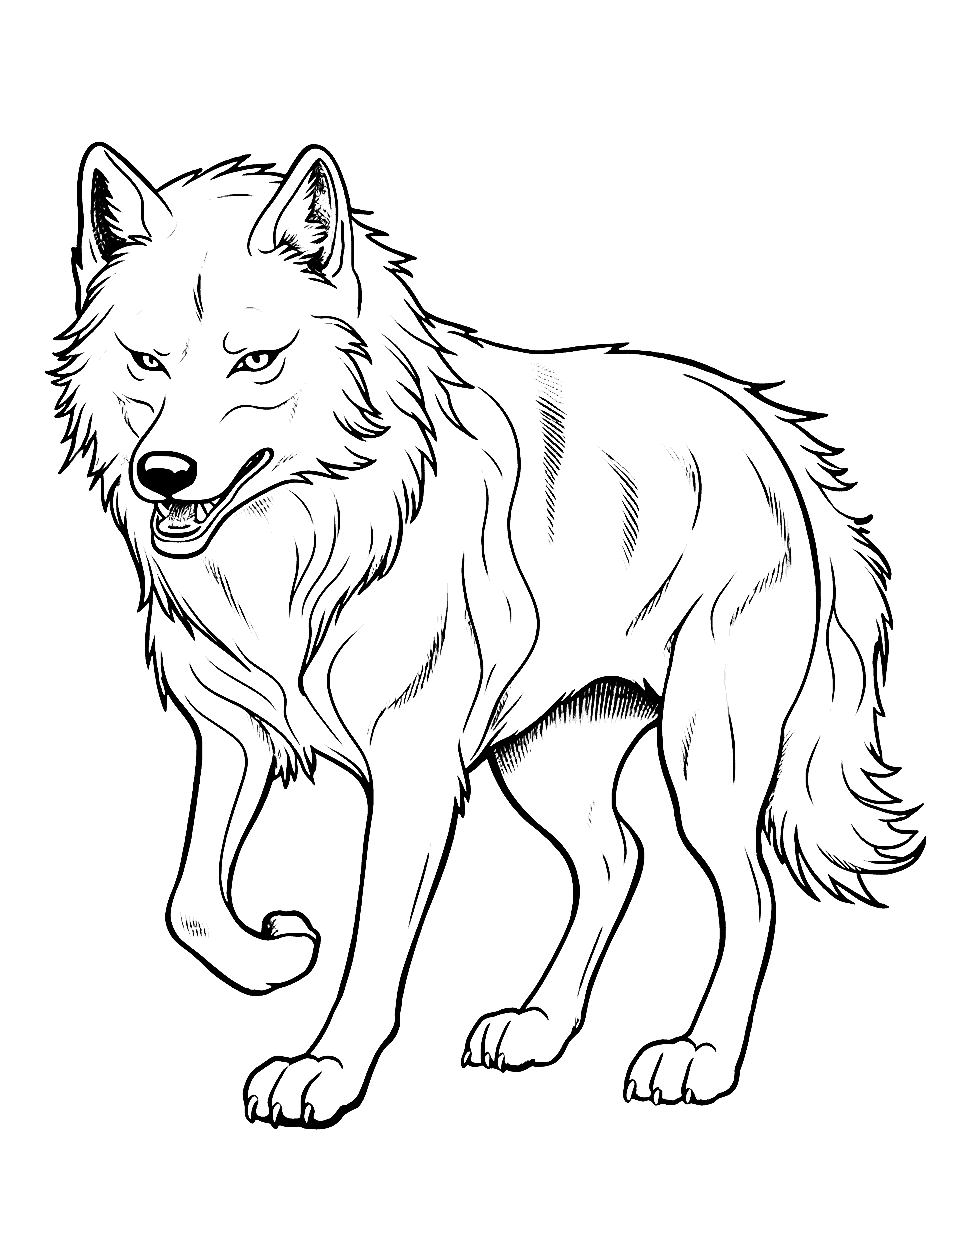 Desert Firewolf Wolf Coloring Page - A wolf made of sand and flames, sprinting.